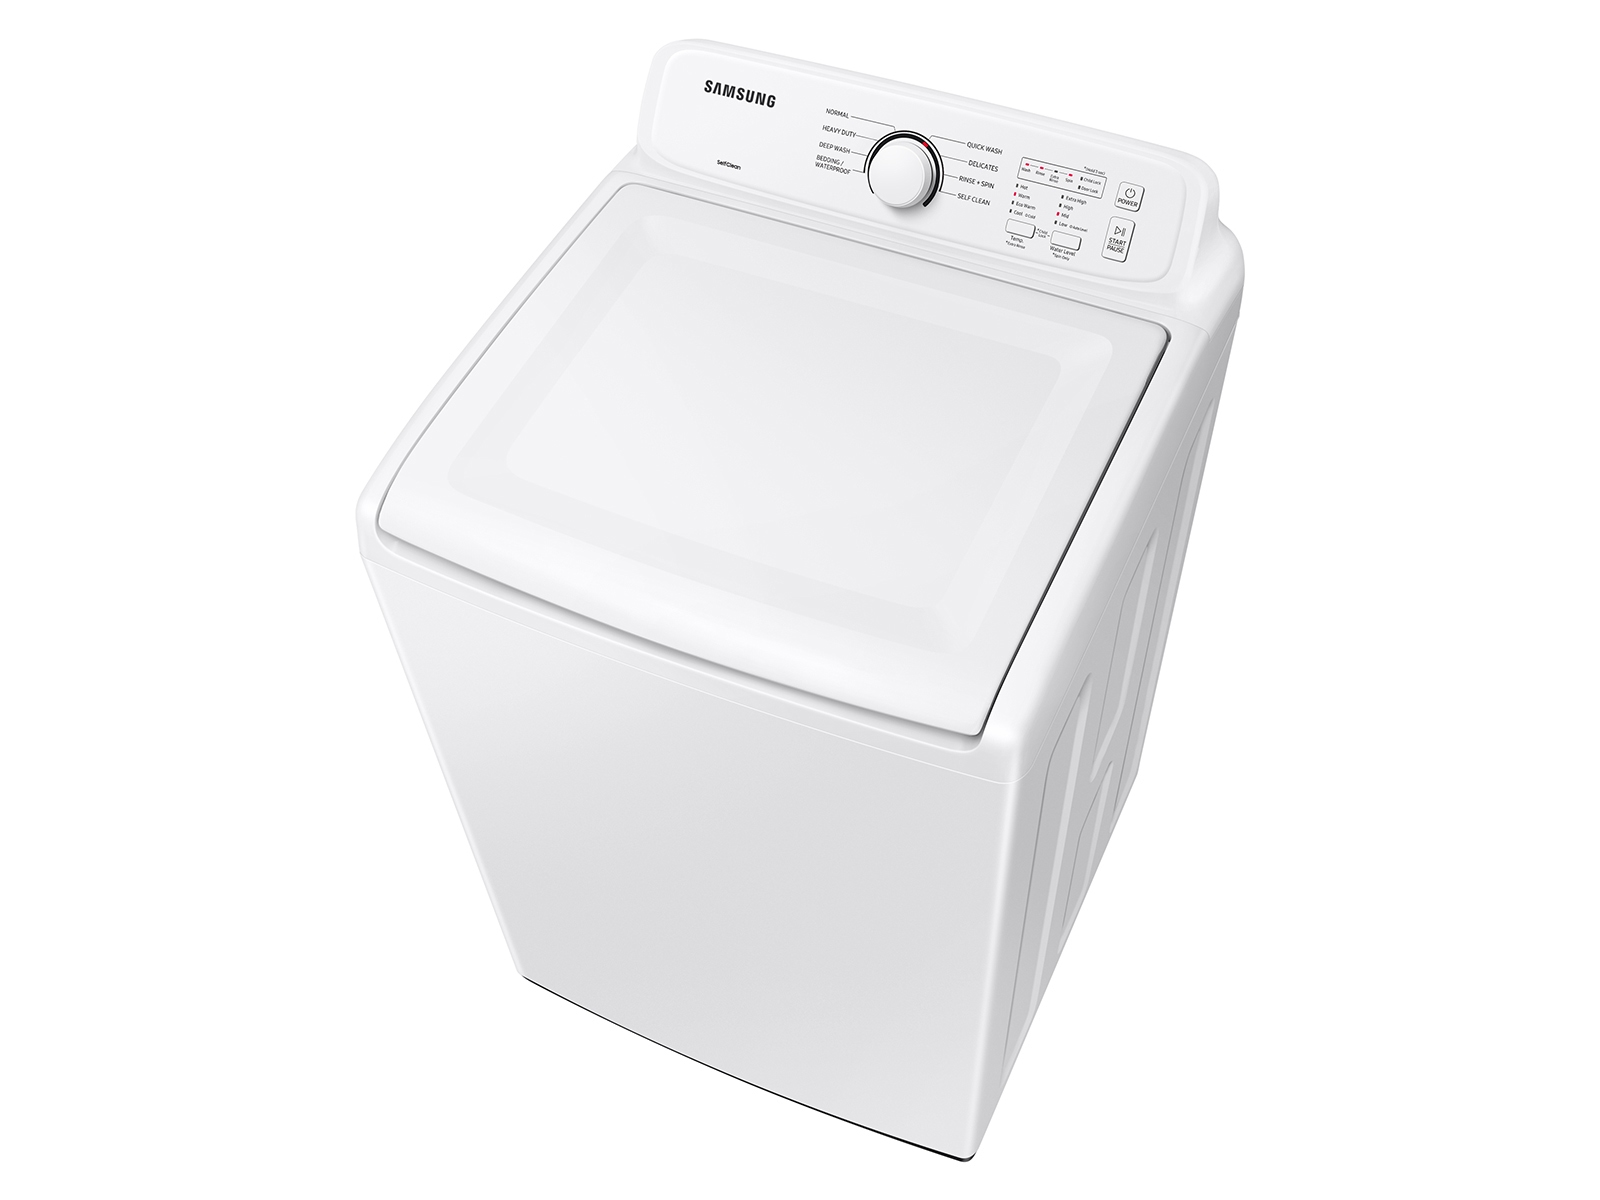 4.1 cu. ft. Capacity Top Load Washer with Soft-Close Lid and 8 Washing  Cycles in White Washers - WA41A3000AW/A4